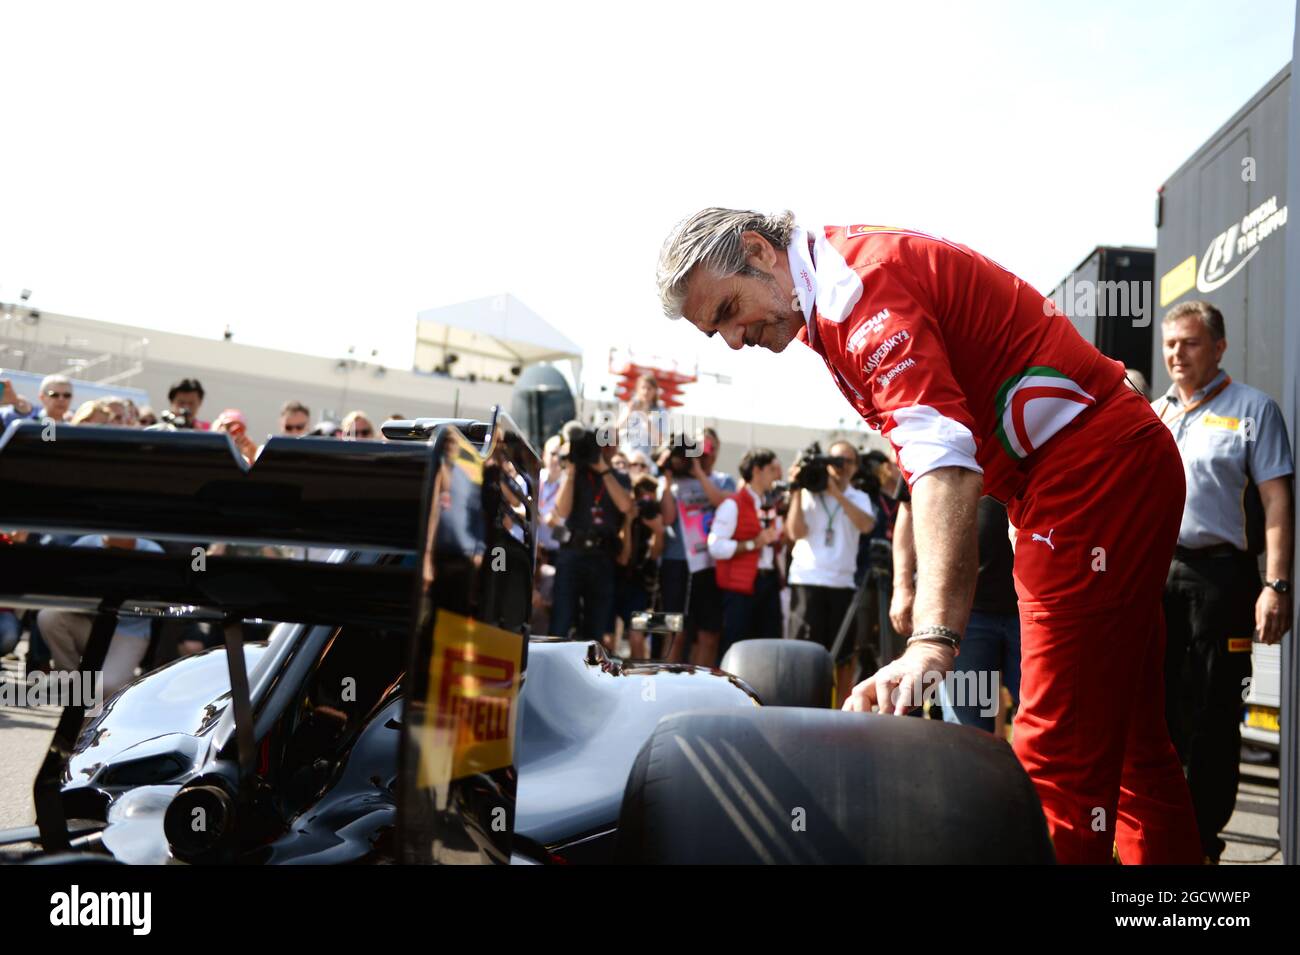 Maurizio Arrivabene (ITA) Ferrari Team Principal takes a look at a Pirell mock up of what a 2017 F1 car and tyres may look like. Monaco Grand Prix, Saturday 28th May 2016. Monte Carlo, Monaco. Stock Photo